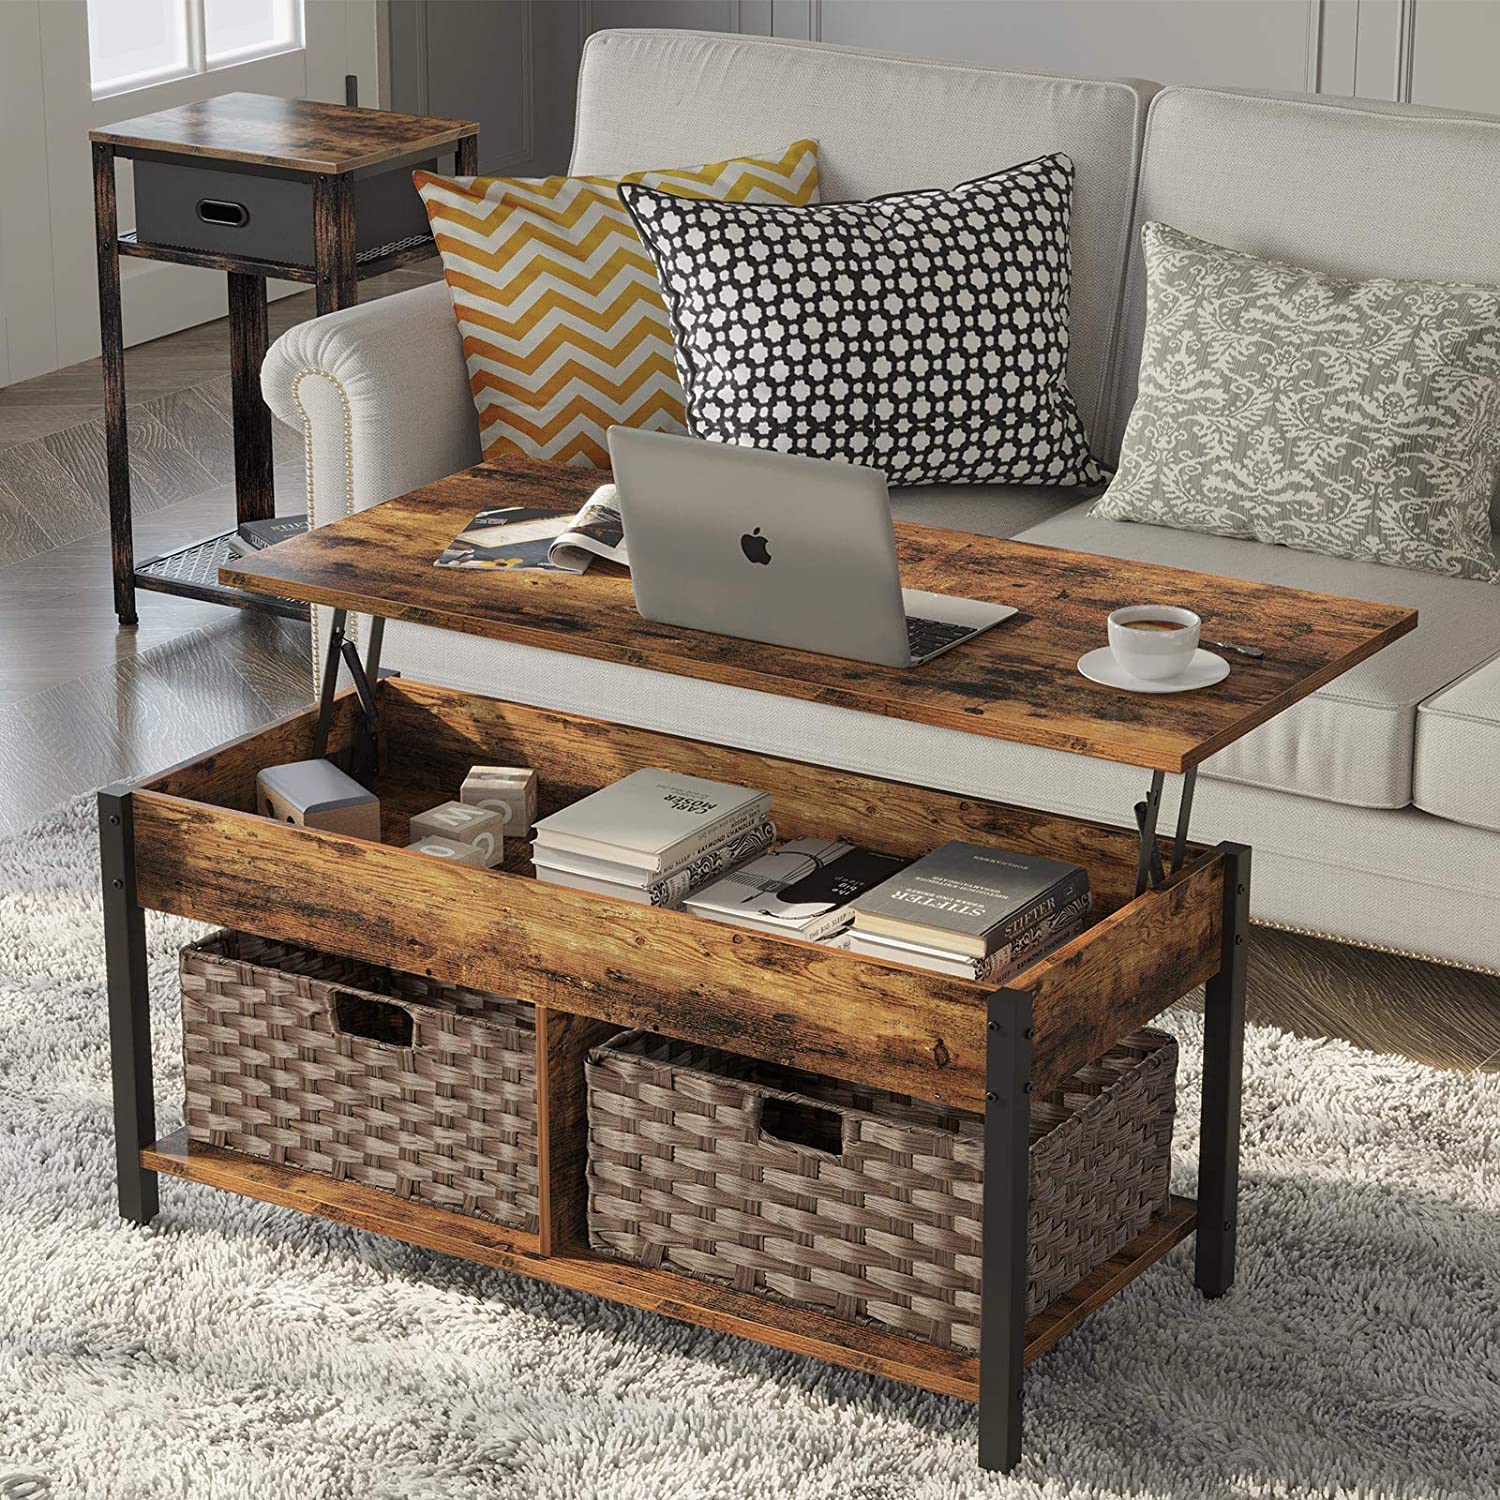 Rolanstar Lift Top Coffee Table with Rattan Baskets